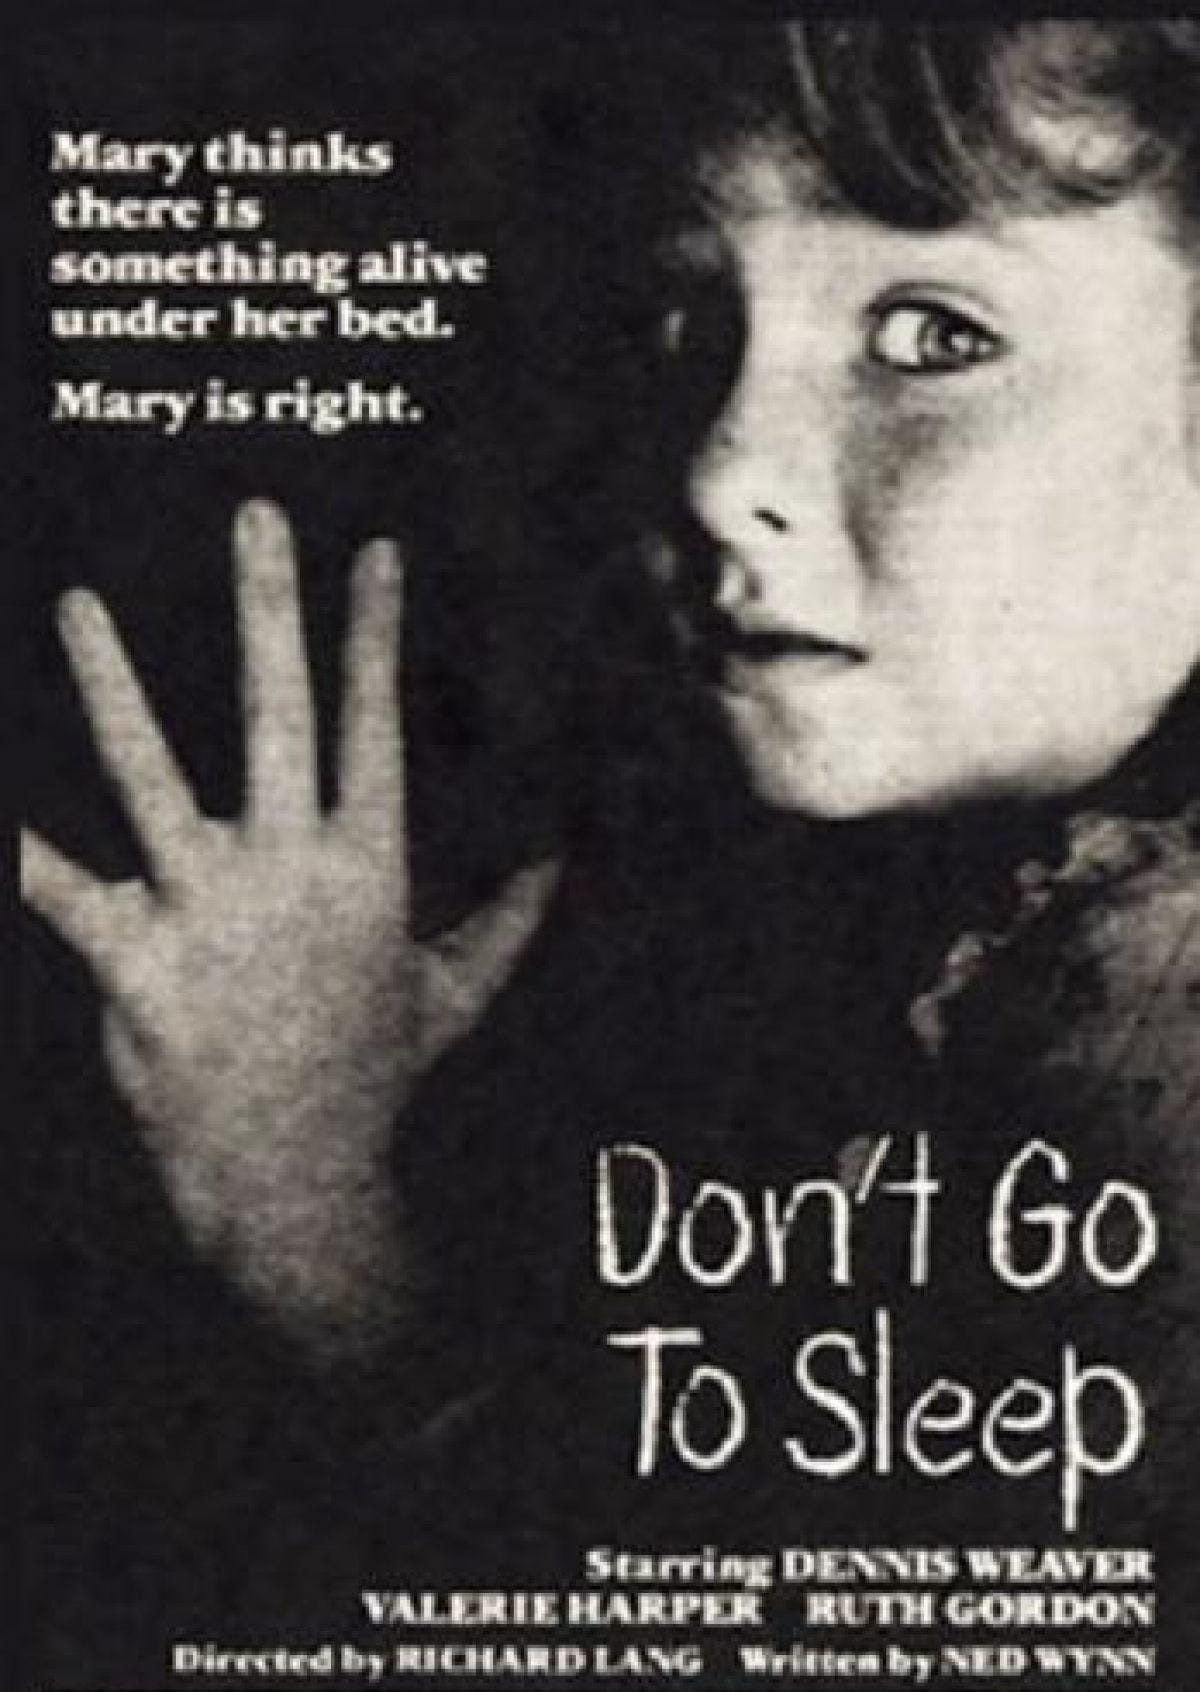 Movies About Sleep: What They Get Right and Wrong